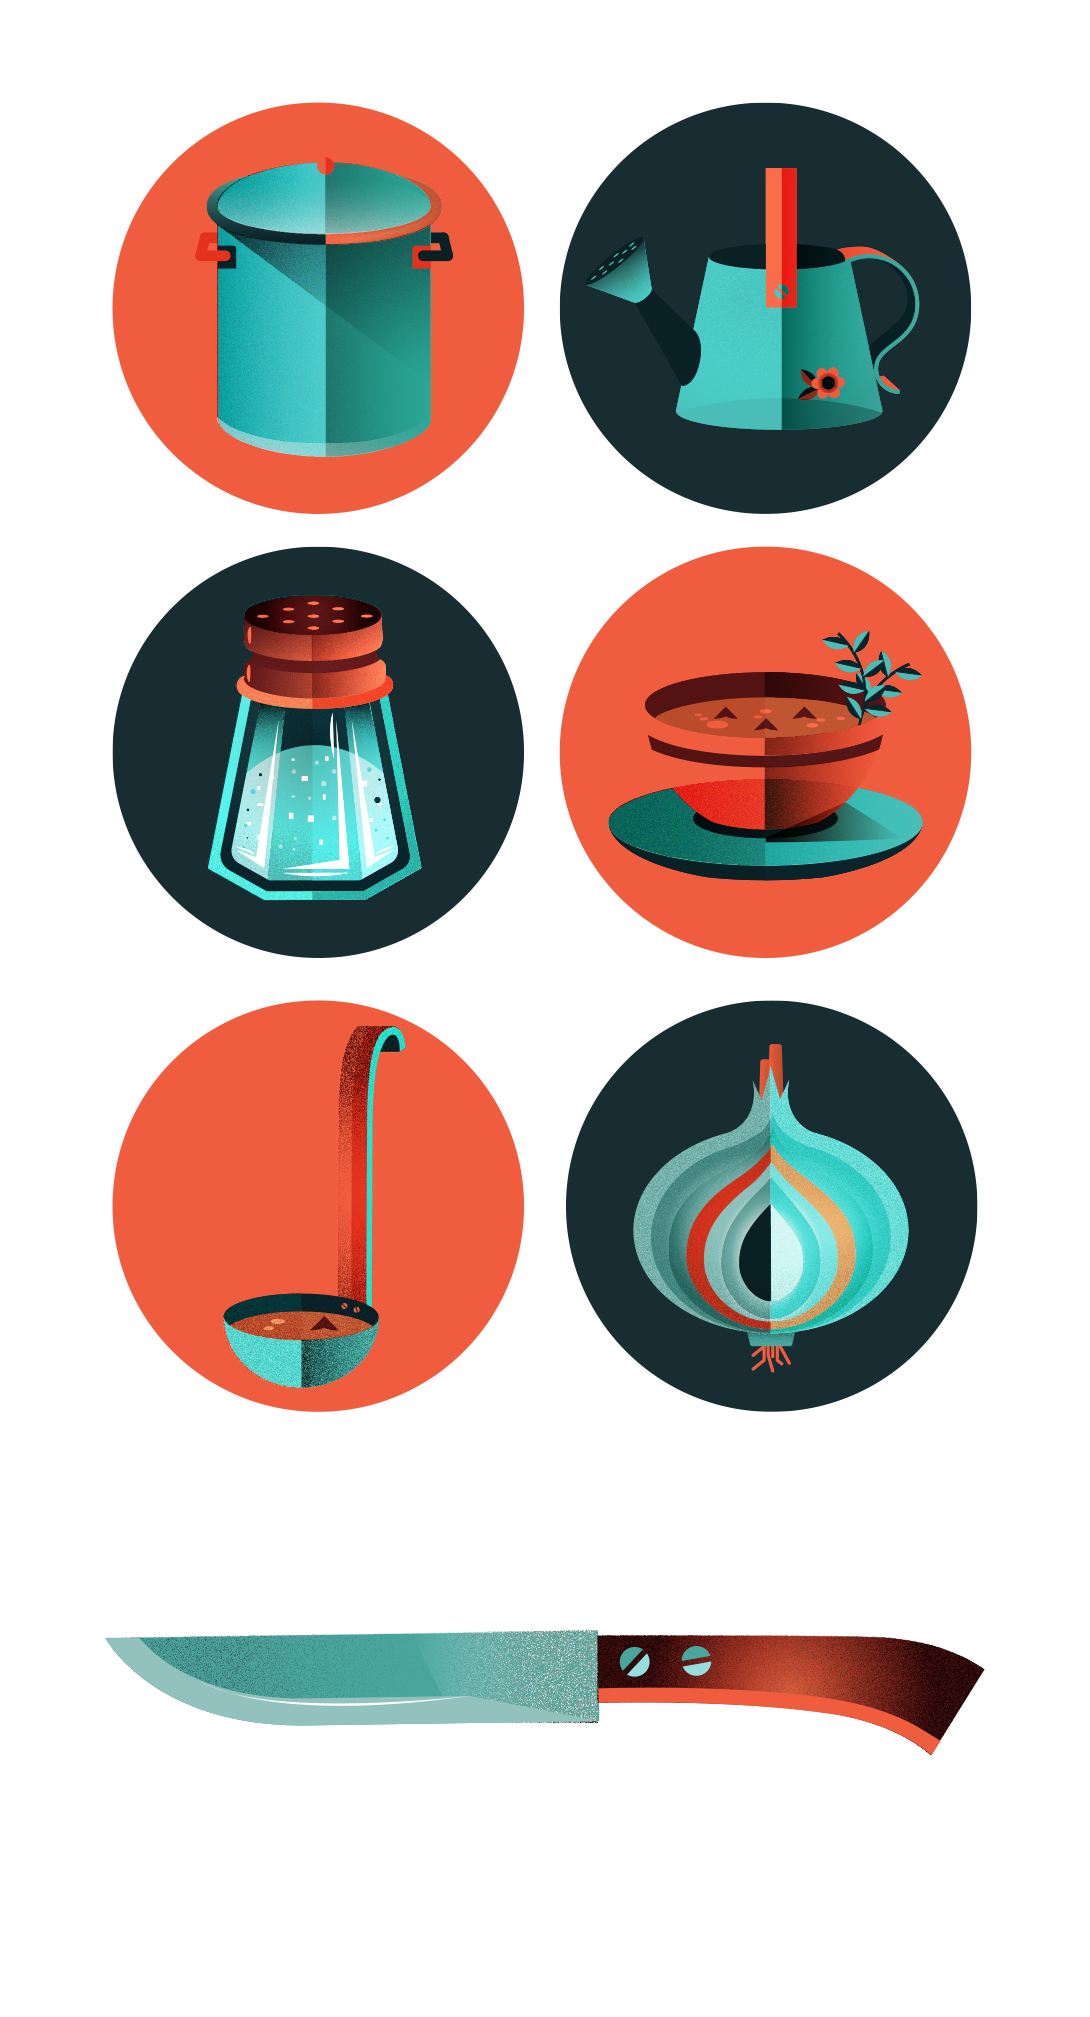 Soup onion soup ilustracion kitchen kitchen icons eat and drink icons